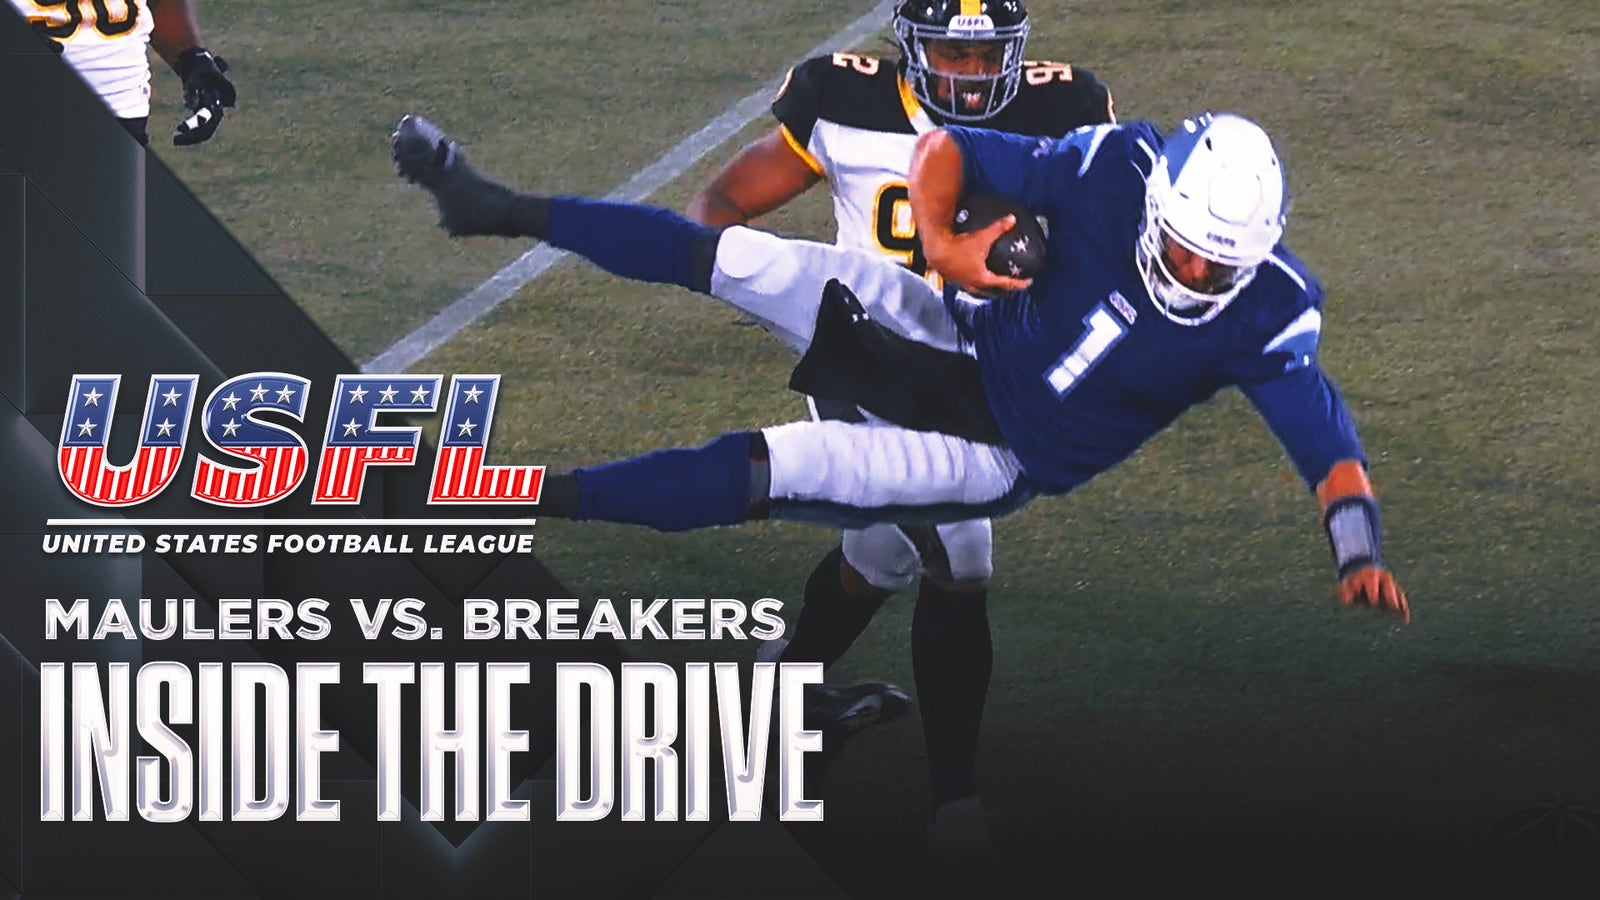 Go ‘Inside the Drive of Breakers’ victory